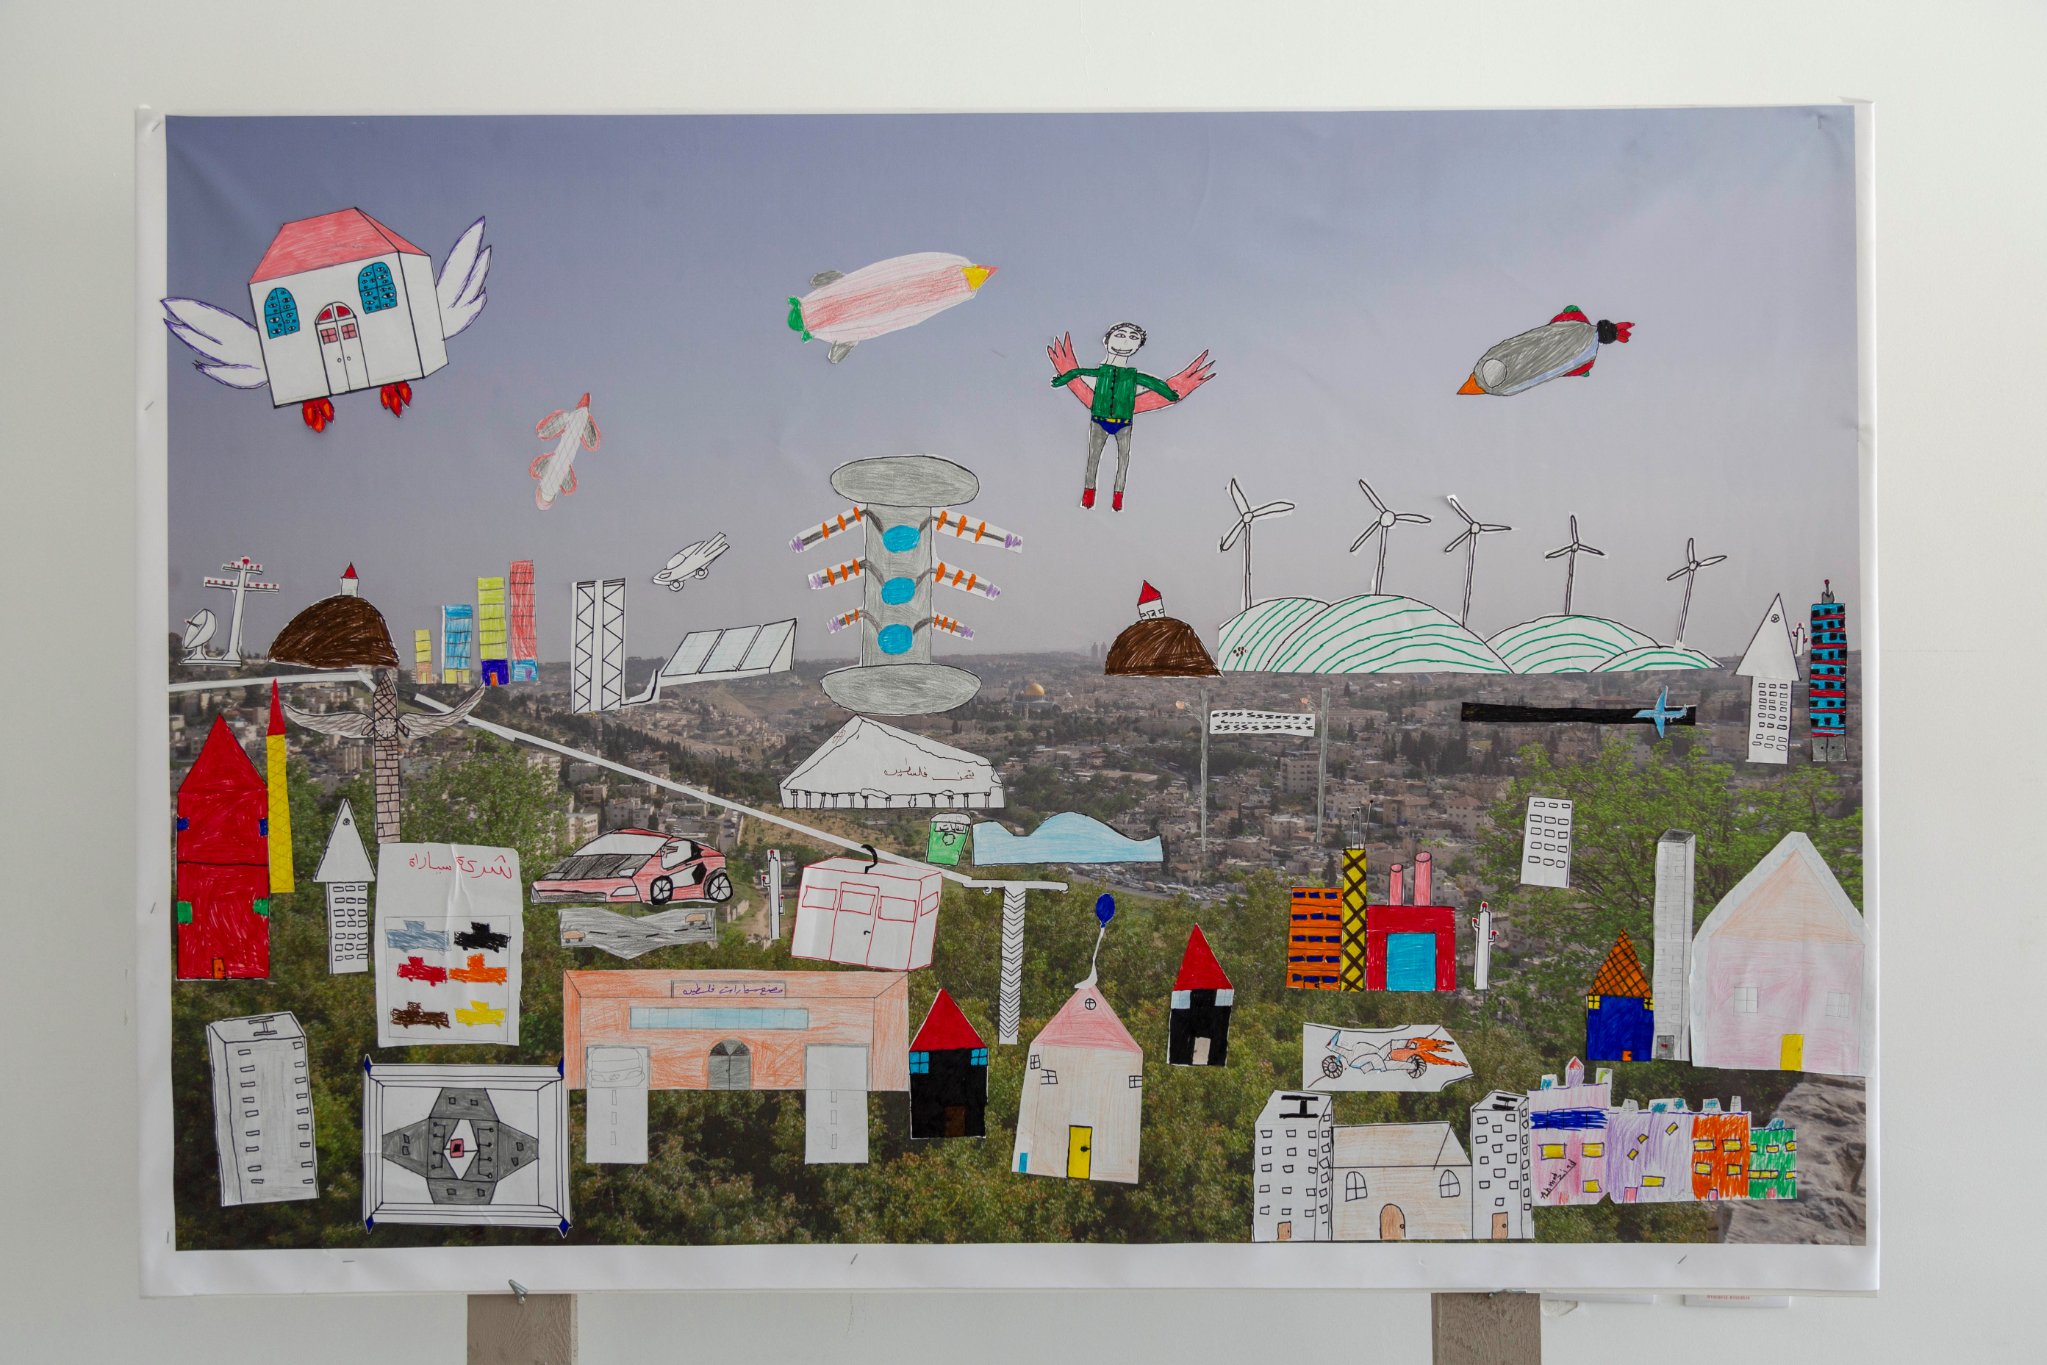 Photo Caption: “These are some of the artworks created by children who participated in a summer camp workshop organised by the Palestinian Museum Education Programme as part of the 2019 Intimate Terrains exhibition. Photo by Hareth Yousef. ©️The Palestinian Museum.”